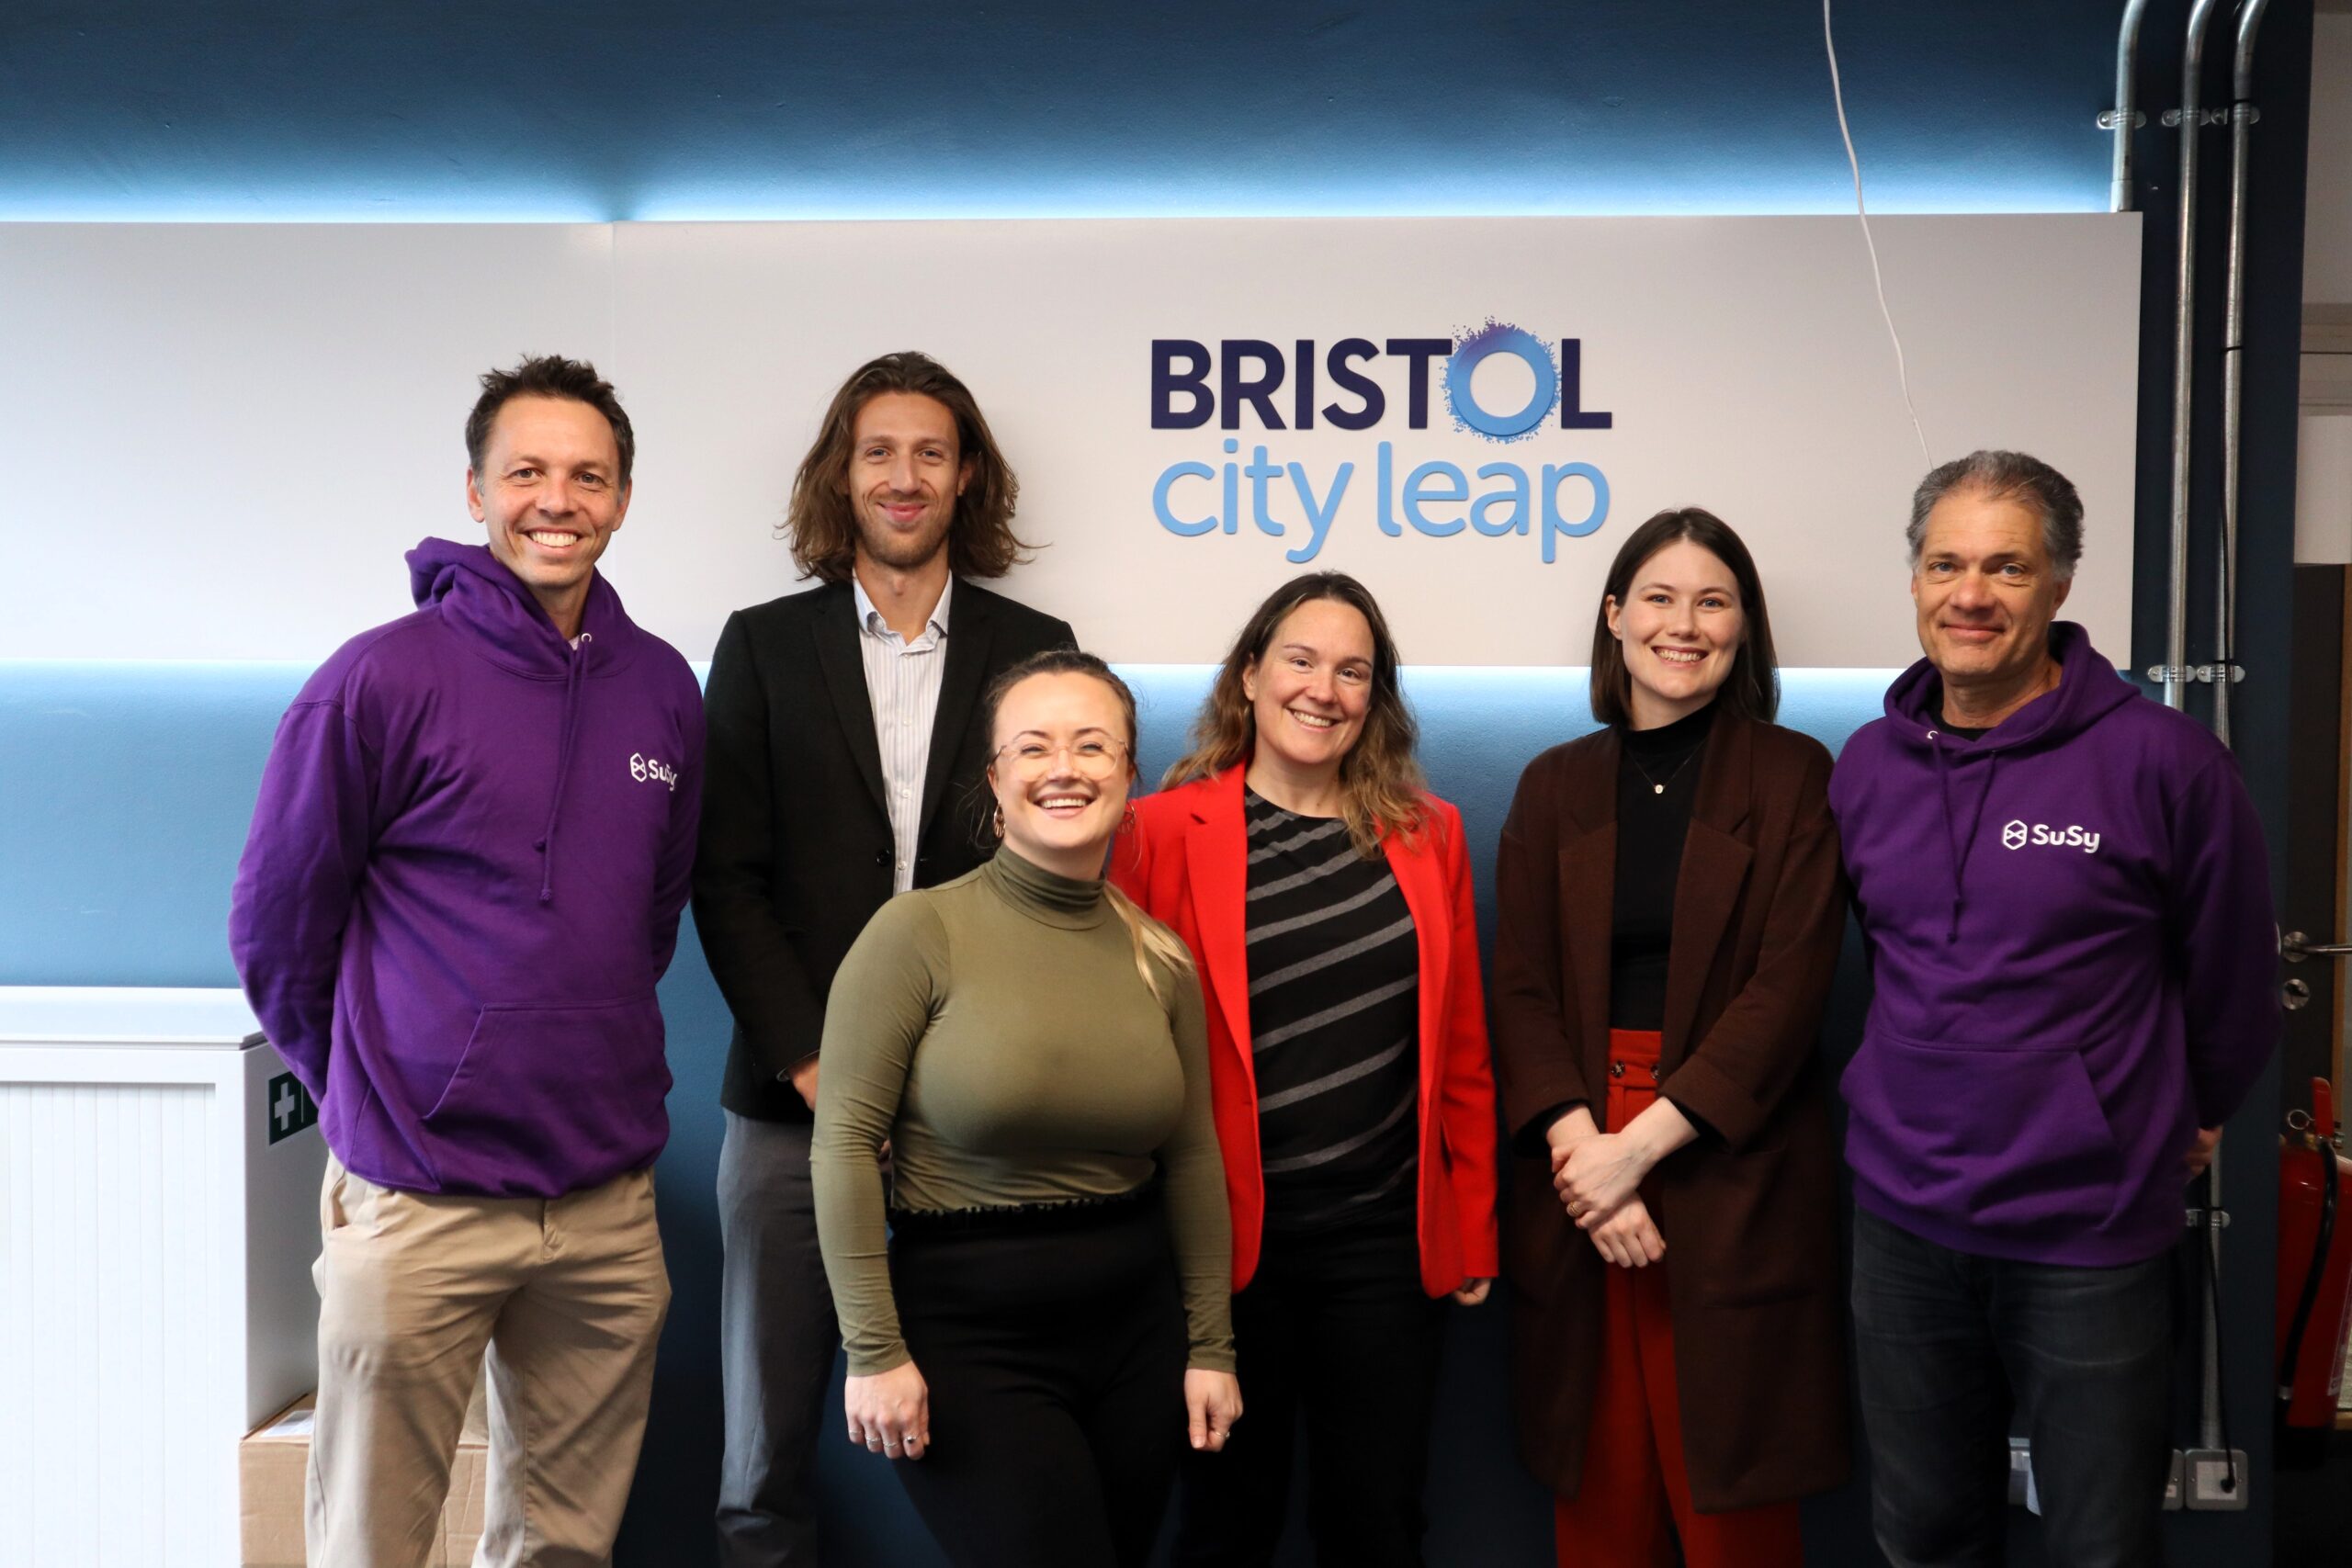 The Bristol City Leap and SuSy teams